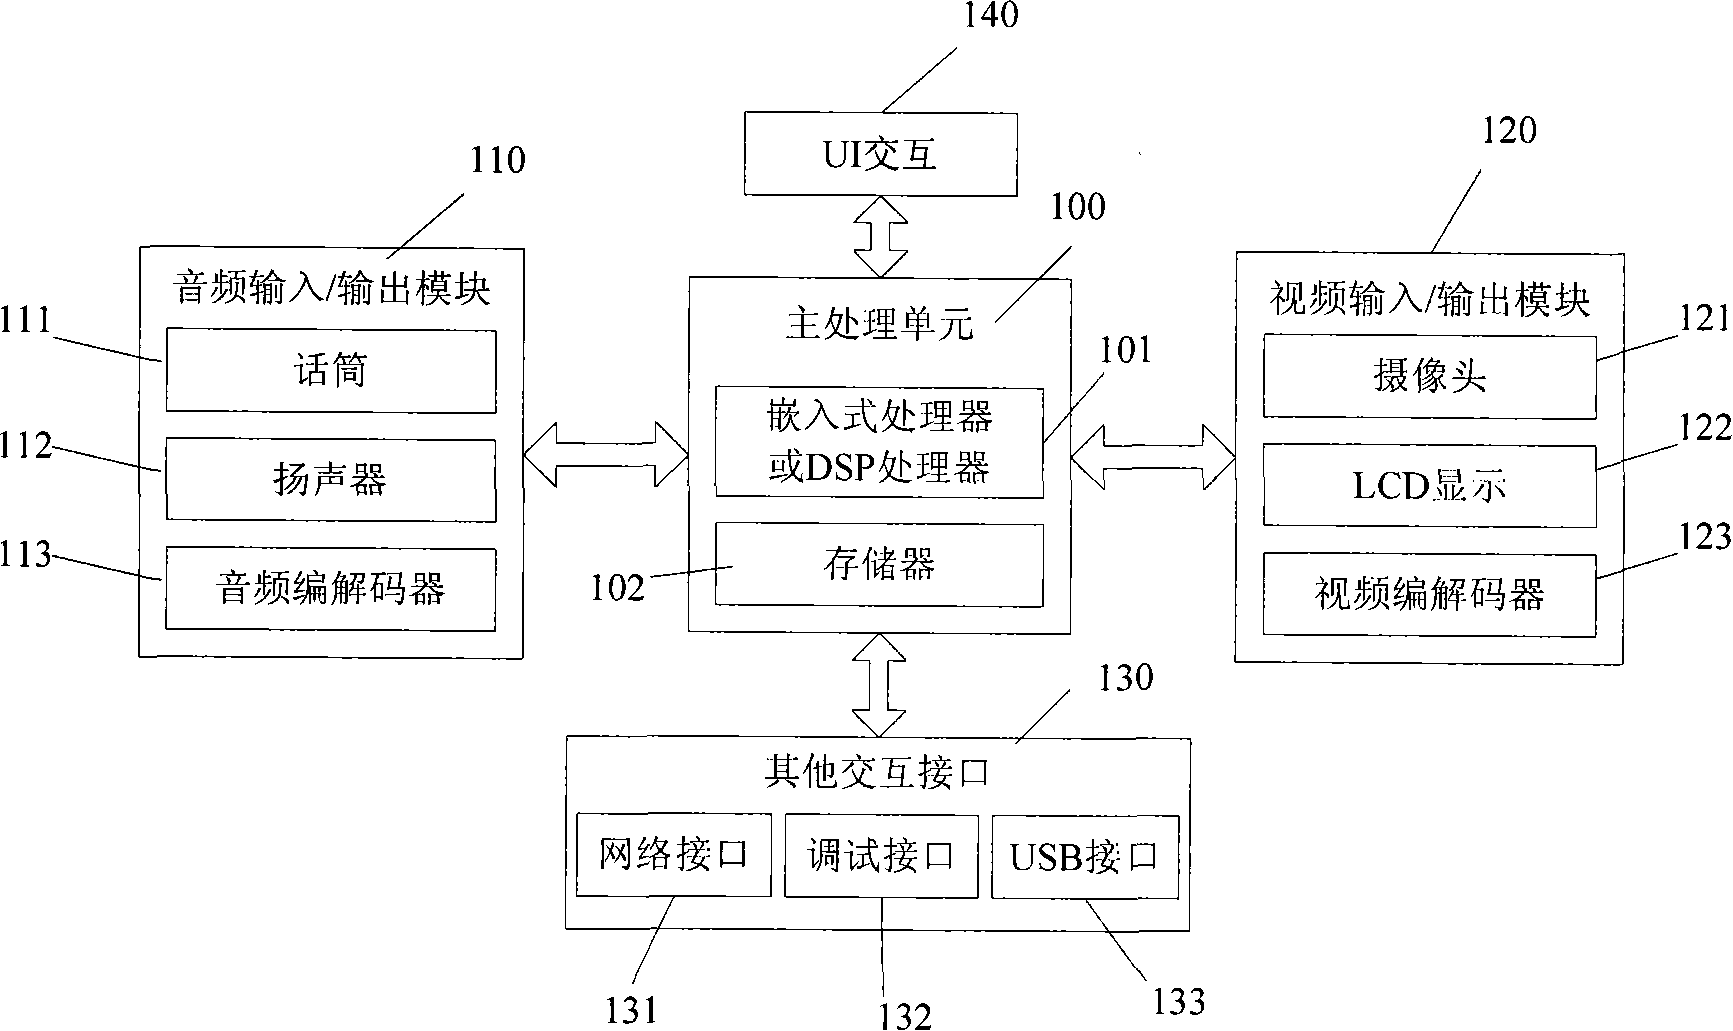 Built-in software application architecture and application orienting to multimedia instrument and device